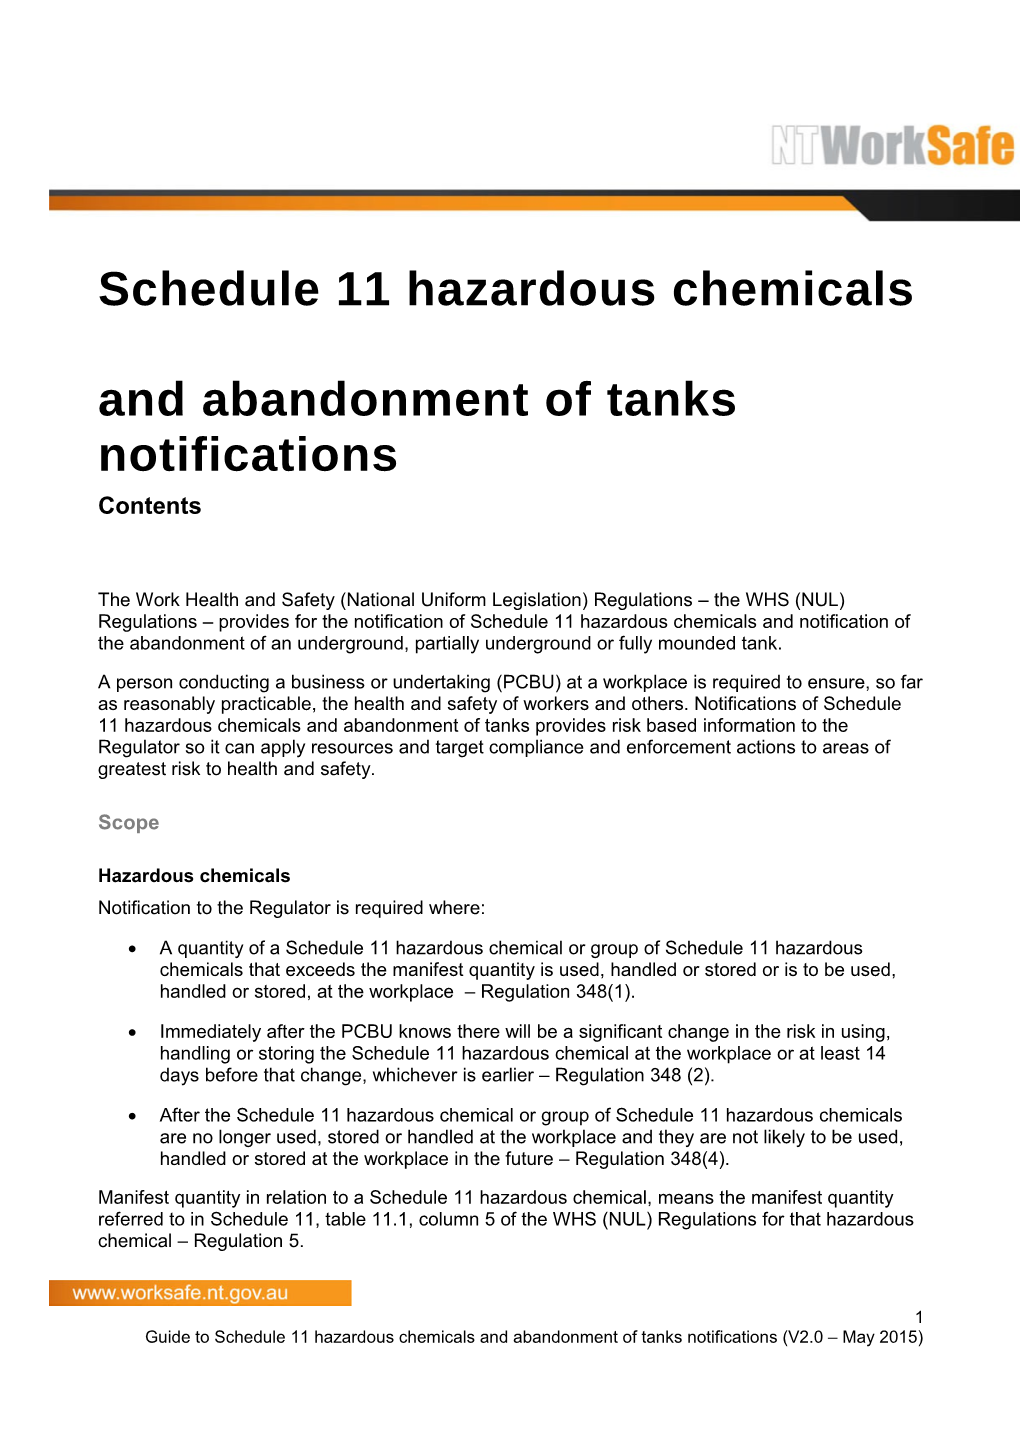 Guide to Schedule 11 Hazardous Chemicals and Abandonment of Tanks Notifications